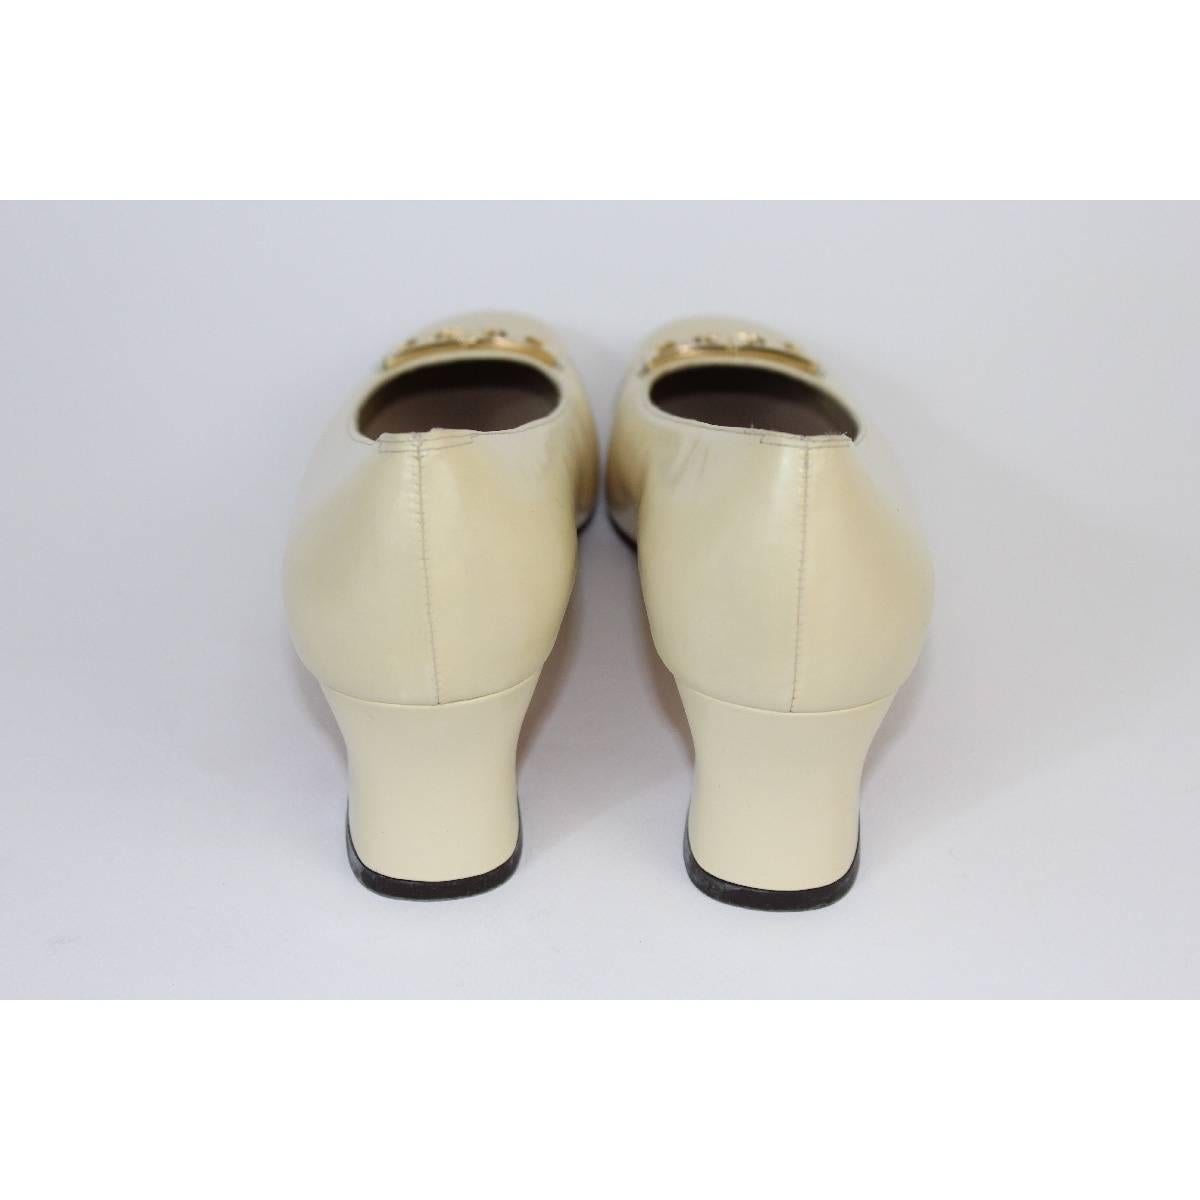 Salvatore Ferragamo ivory leather shoes NWT women's size 9 us made italy new  For Sale 2